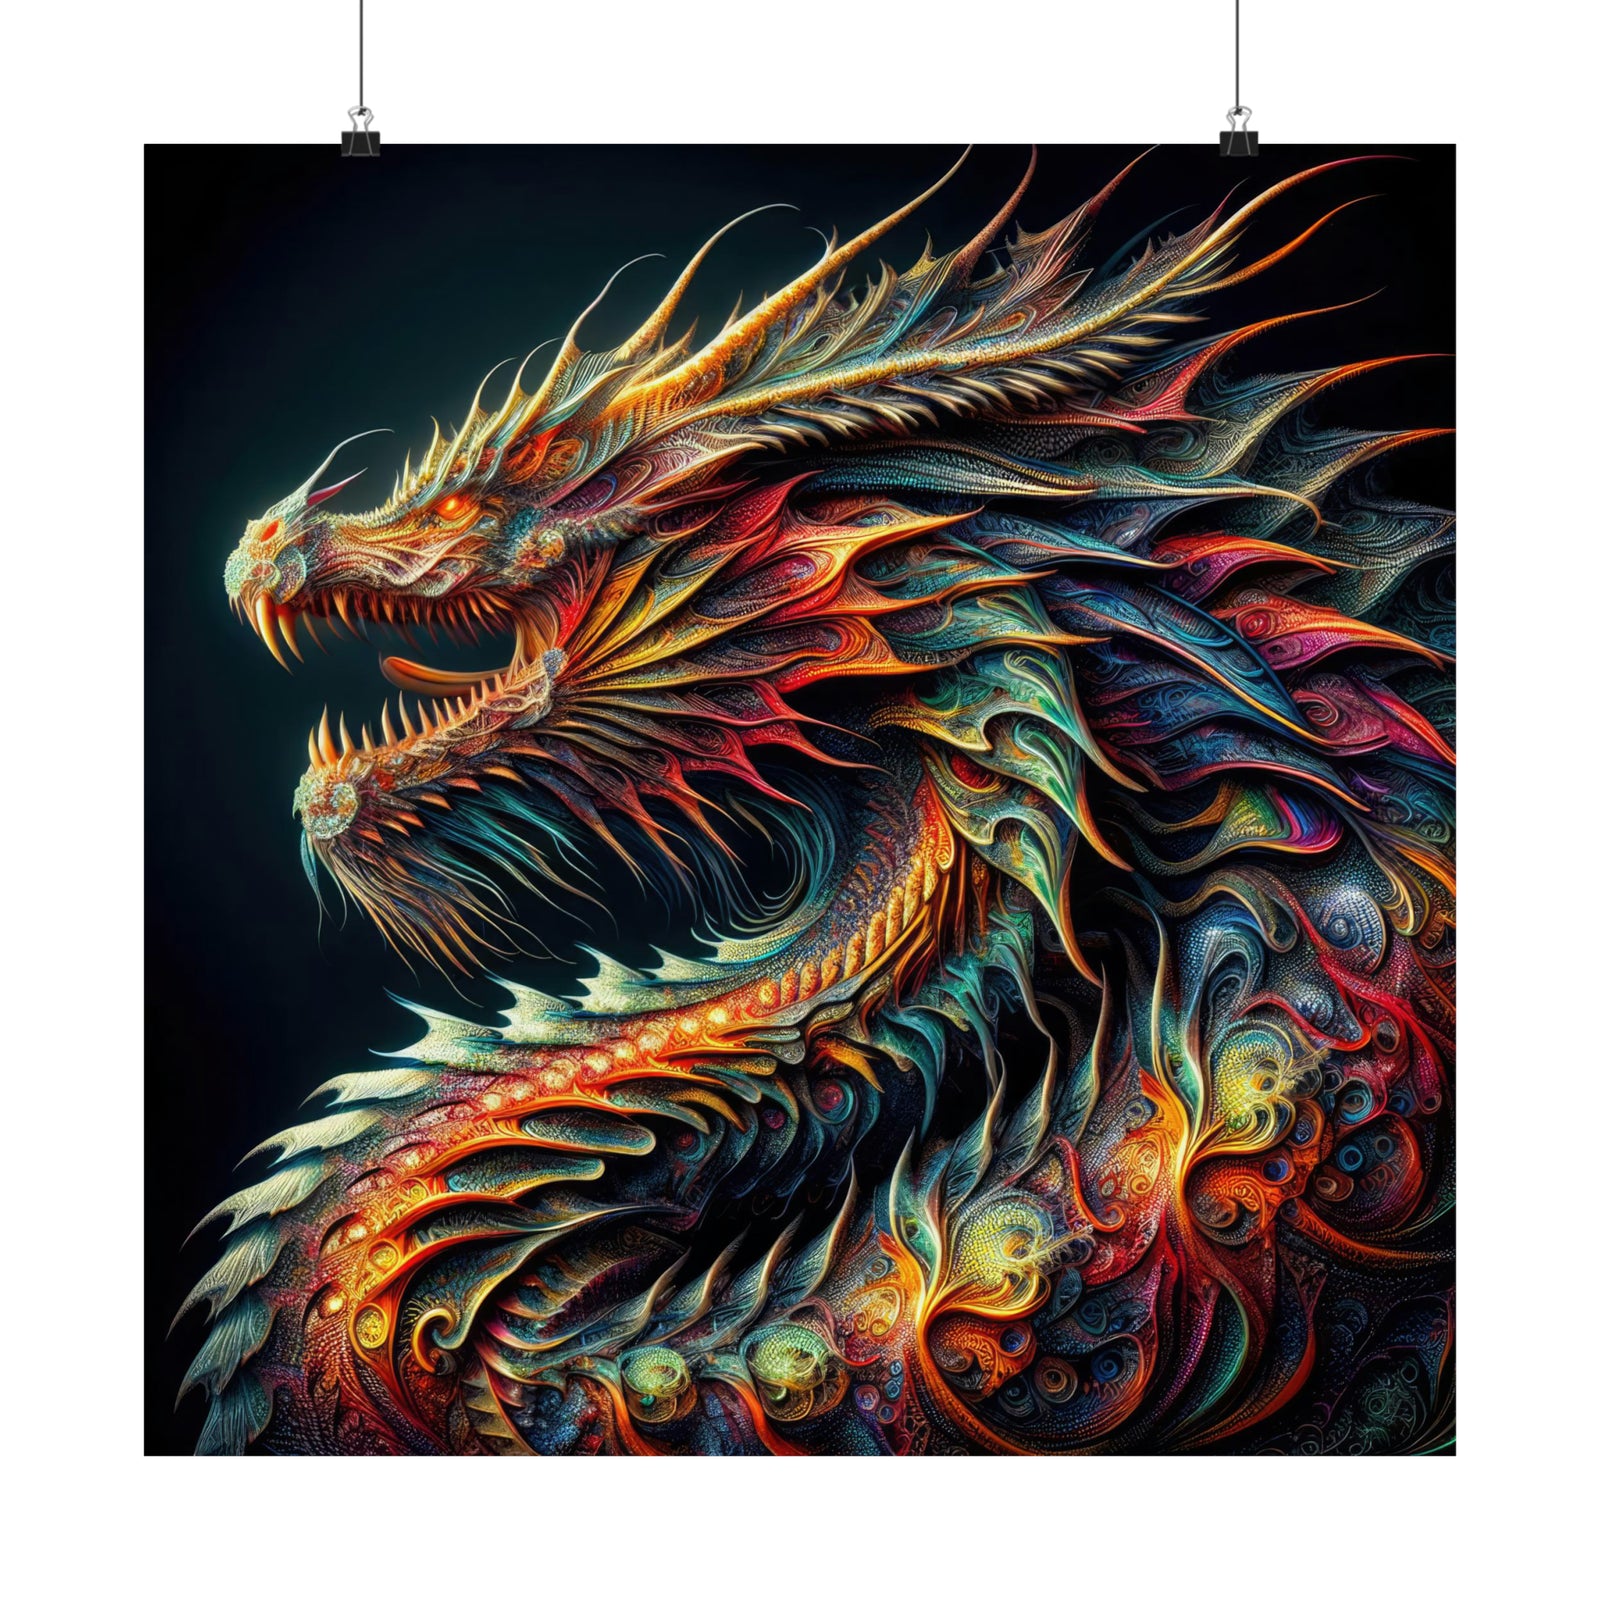 The Jewel of Dragons Poster